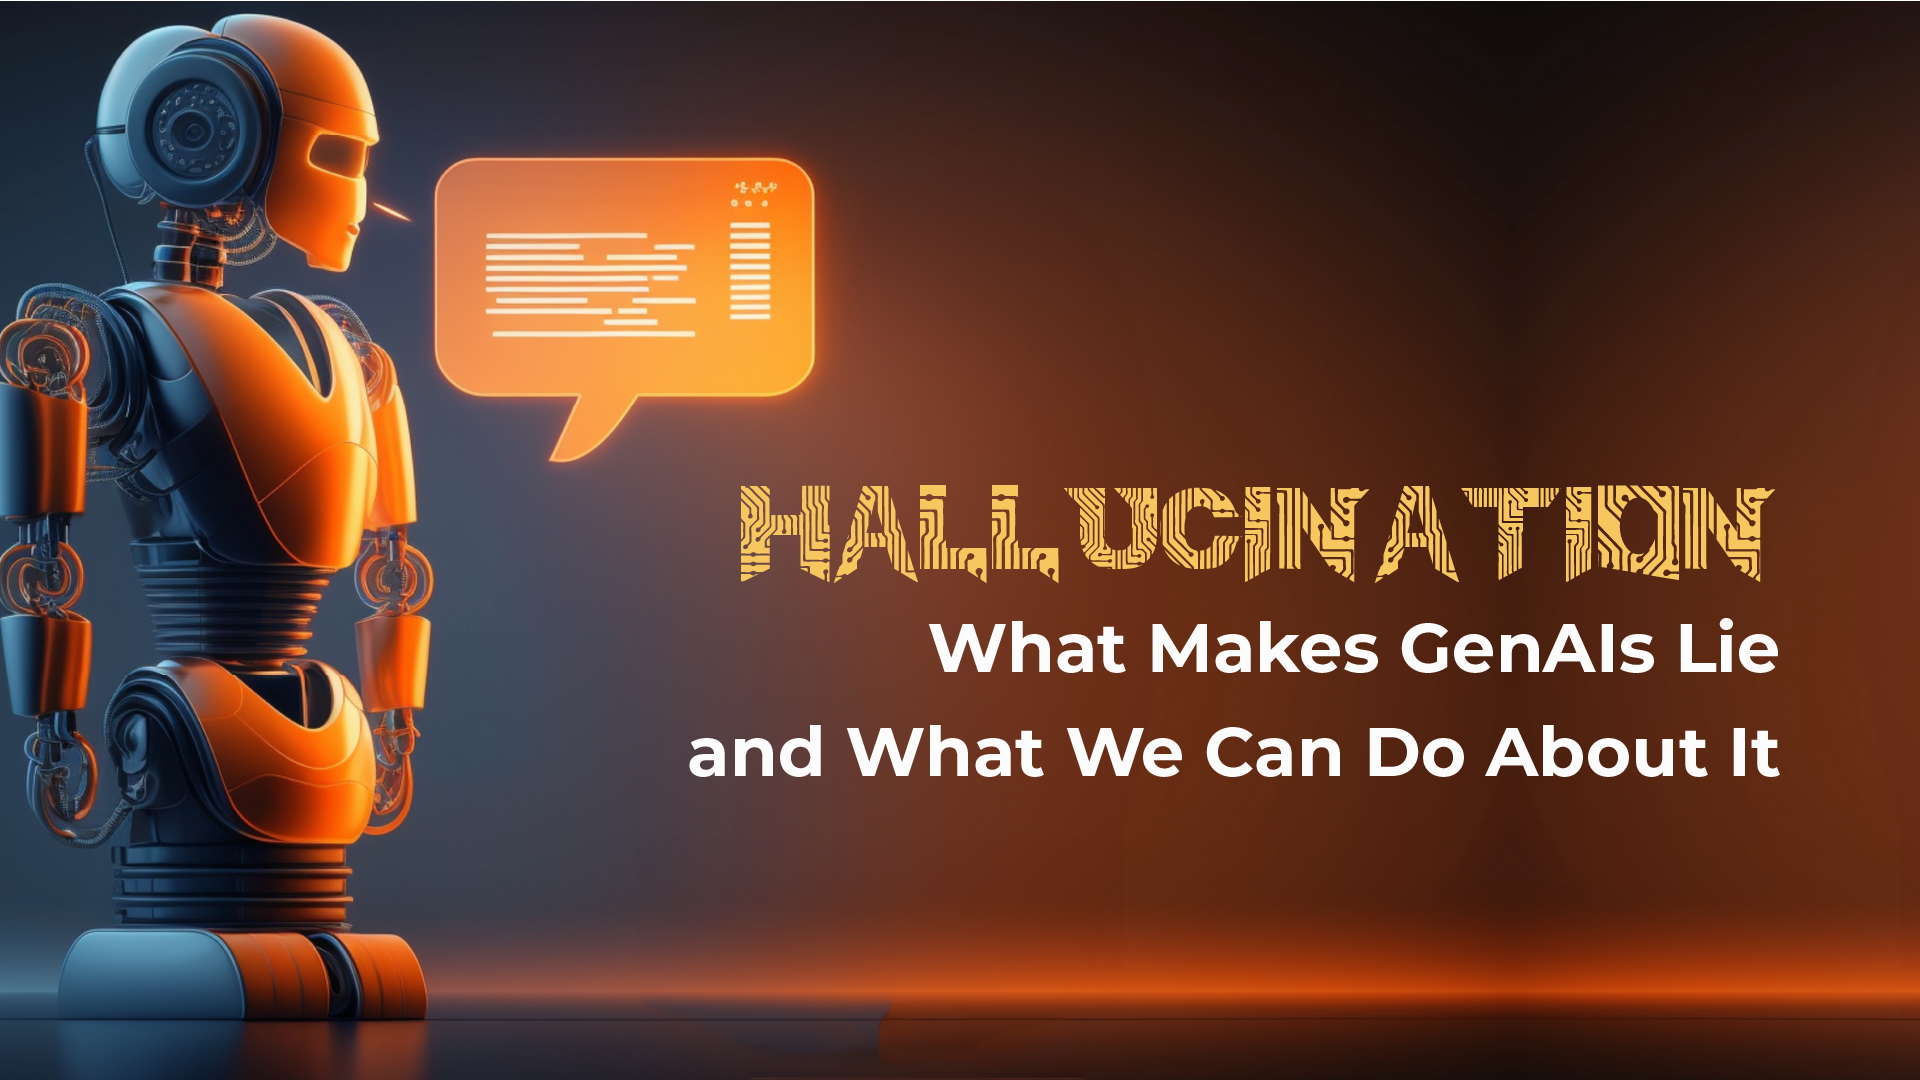 Hallucination: What Makes GenAIs Lie and What We Can Do About It